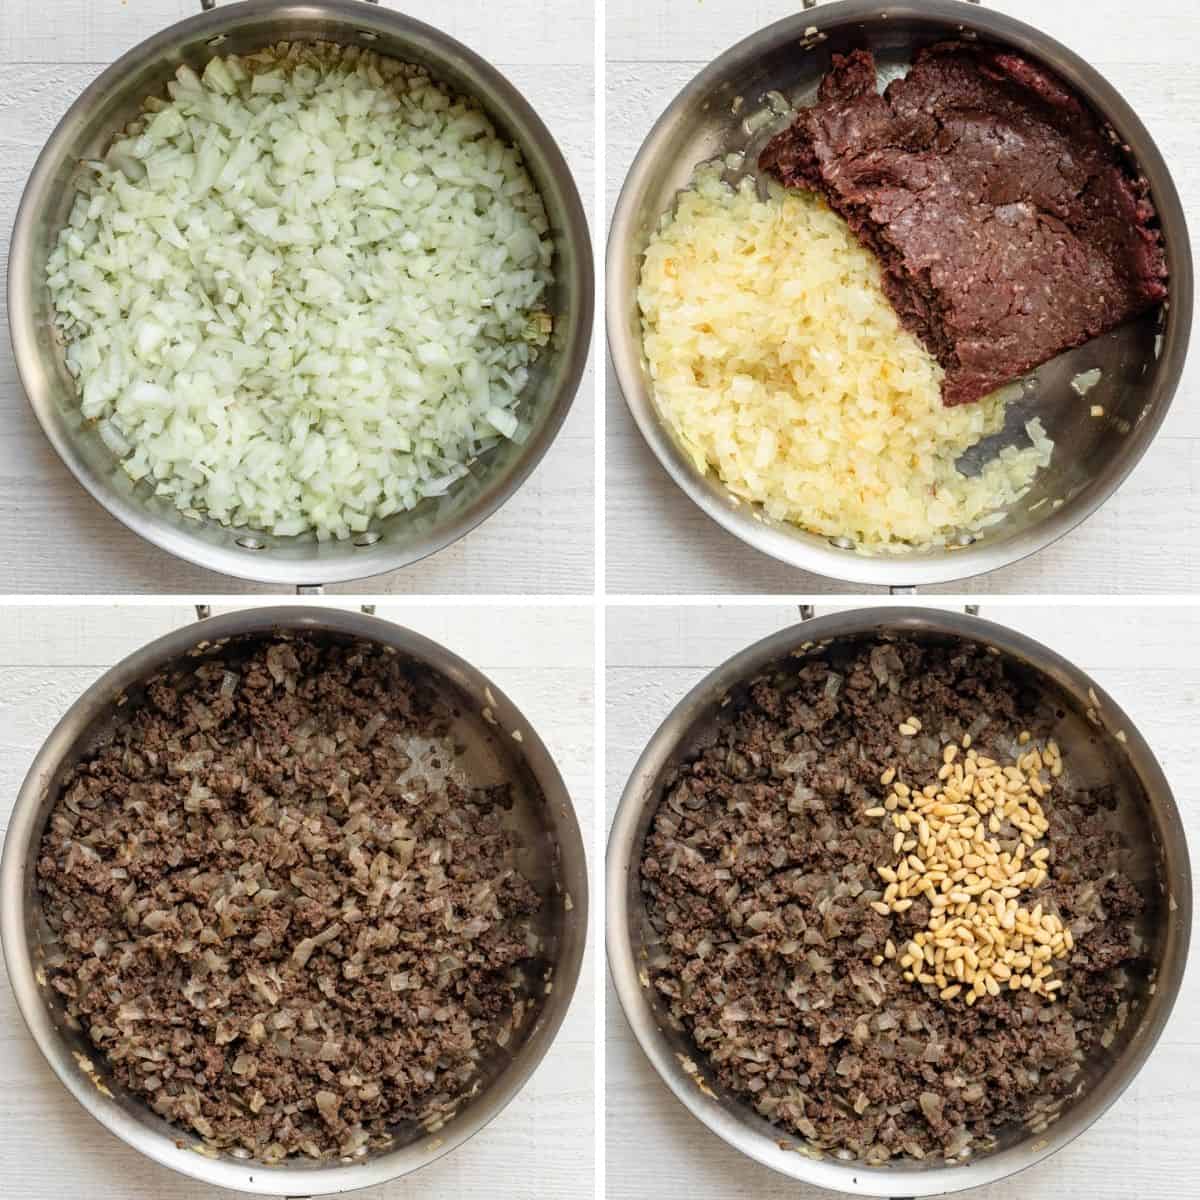 4 photo collage showing the hashweh mixture, starting with the onions, then beef, then spices and pine nuts